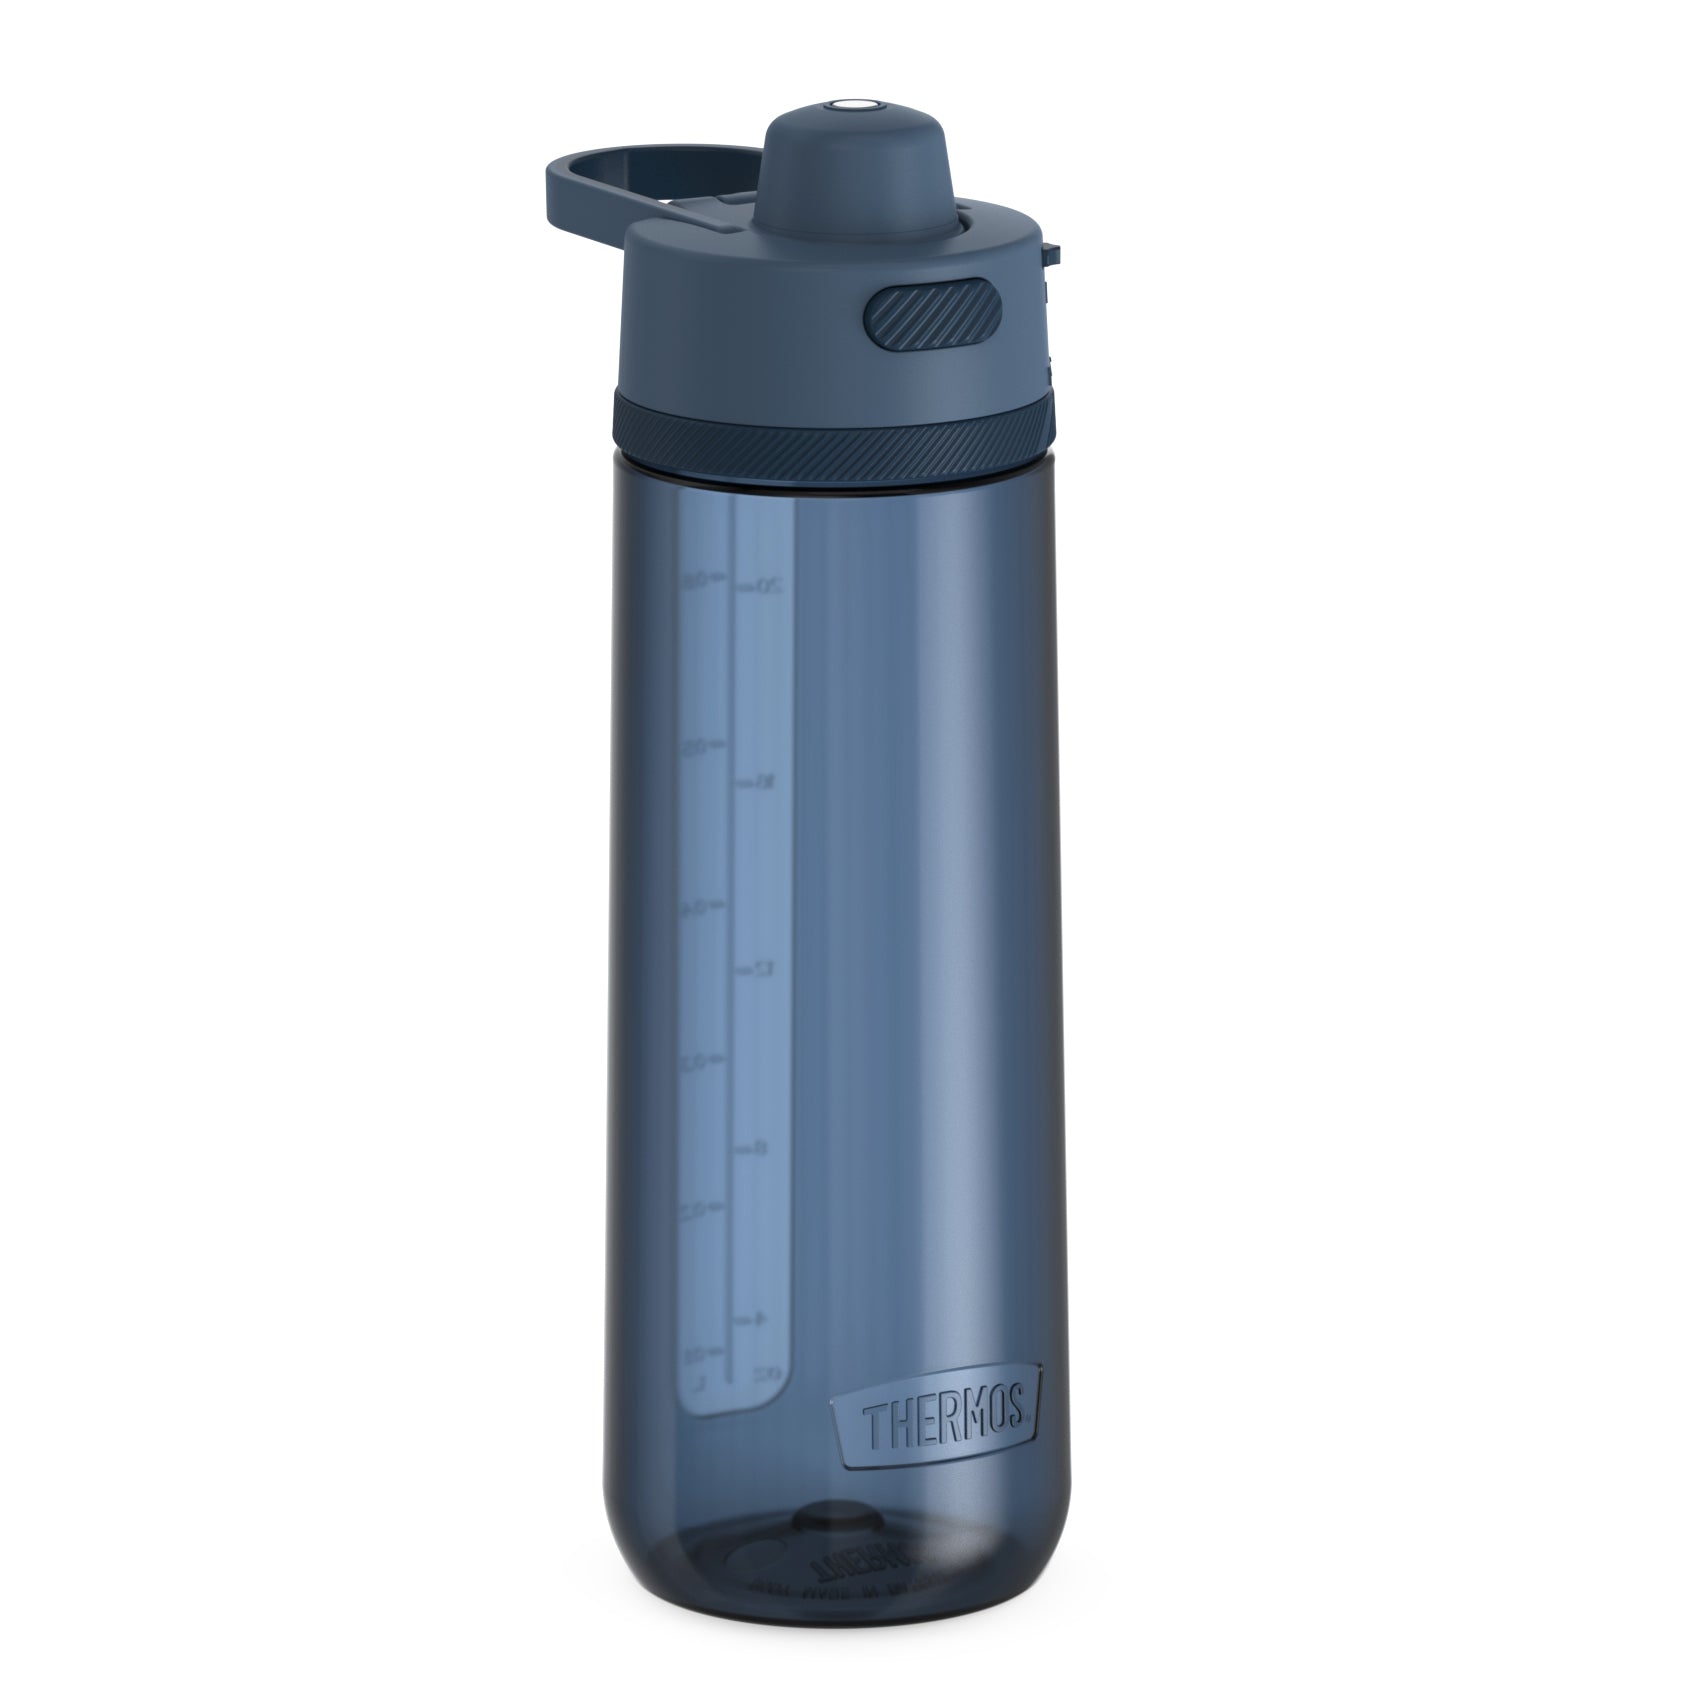 Stainless Steel Beverage Dispenser, Thermos with 20